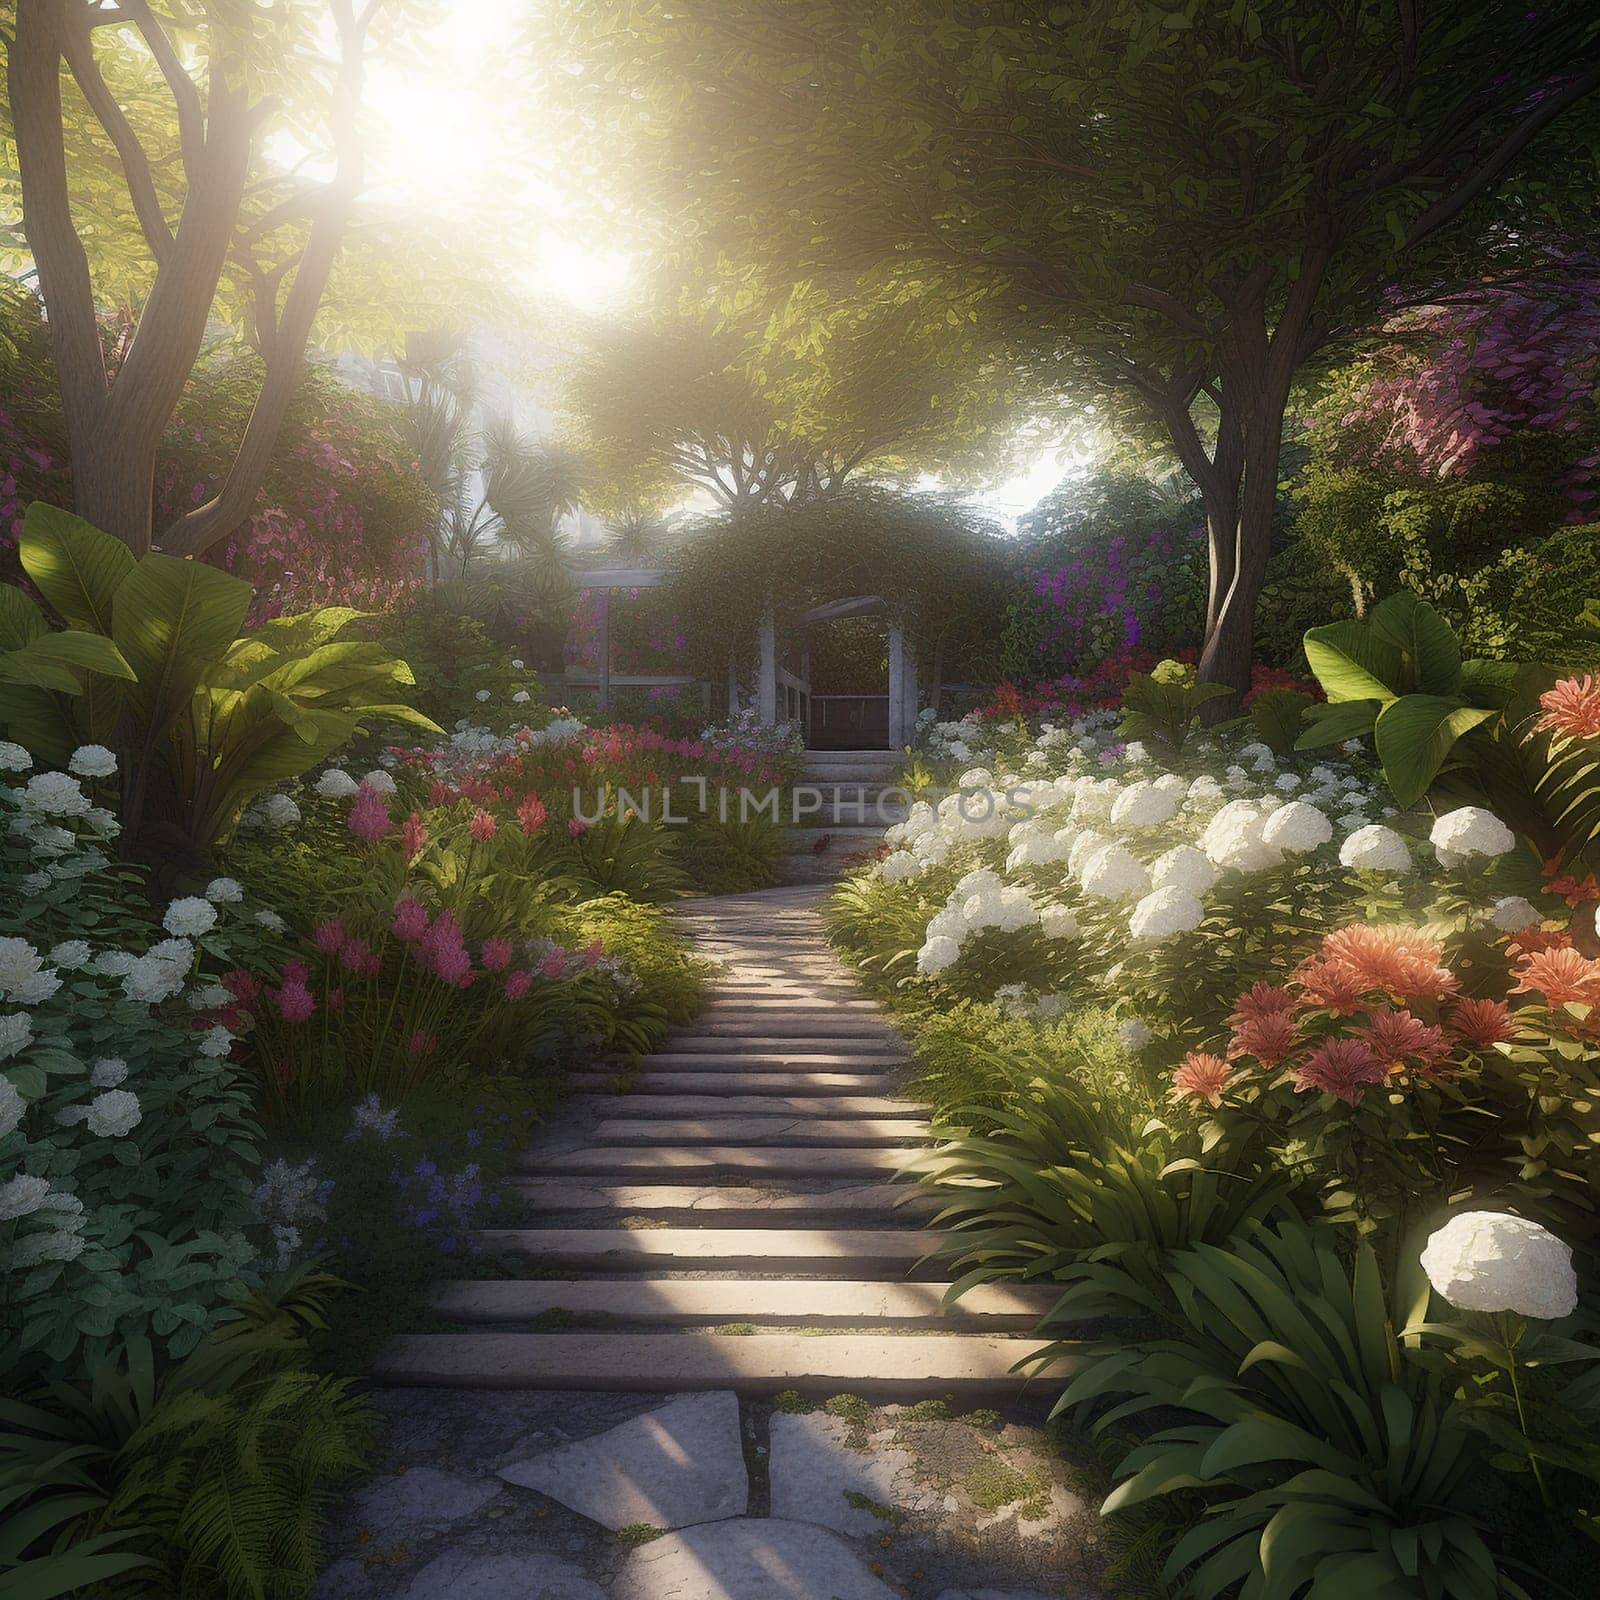 Step into a world of tranquility and beauty with this serene, tranquil garden featuring beautiful flowers and foliage. The garden is well-tended and vibrant, with a sense of peace and calm. Pathways, seating areas, or other features invite the viewer to linger and explore, discovering new wonders with every step.